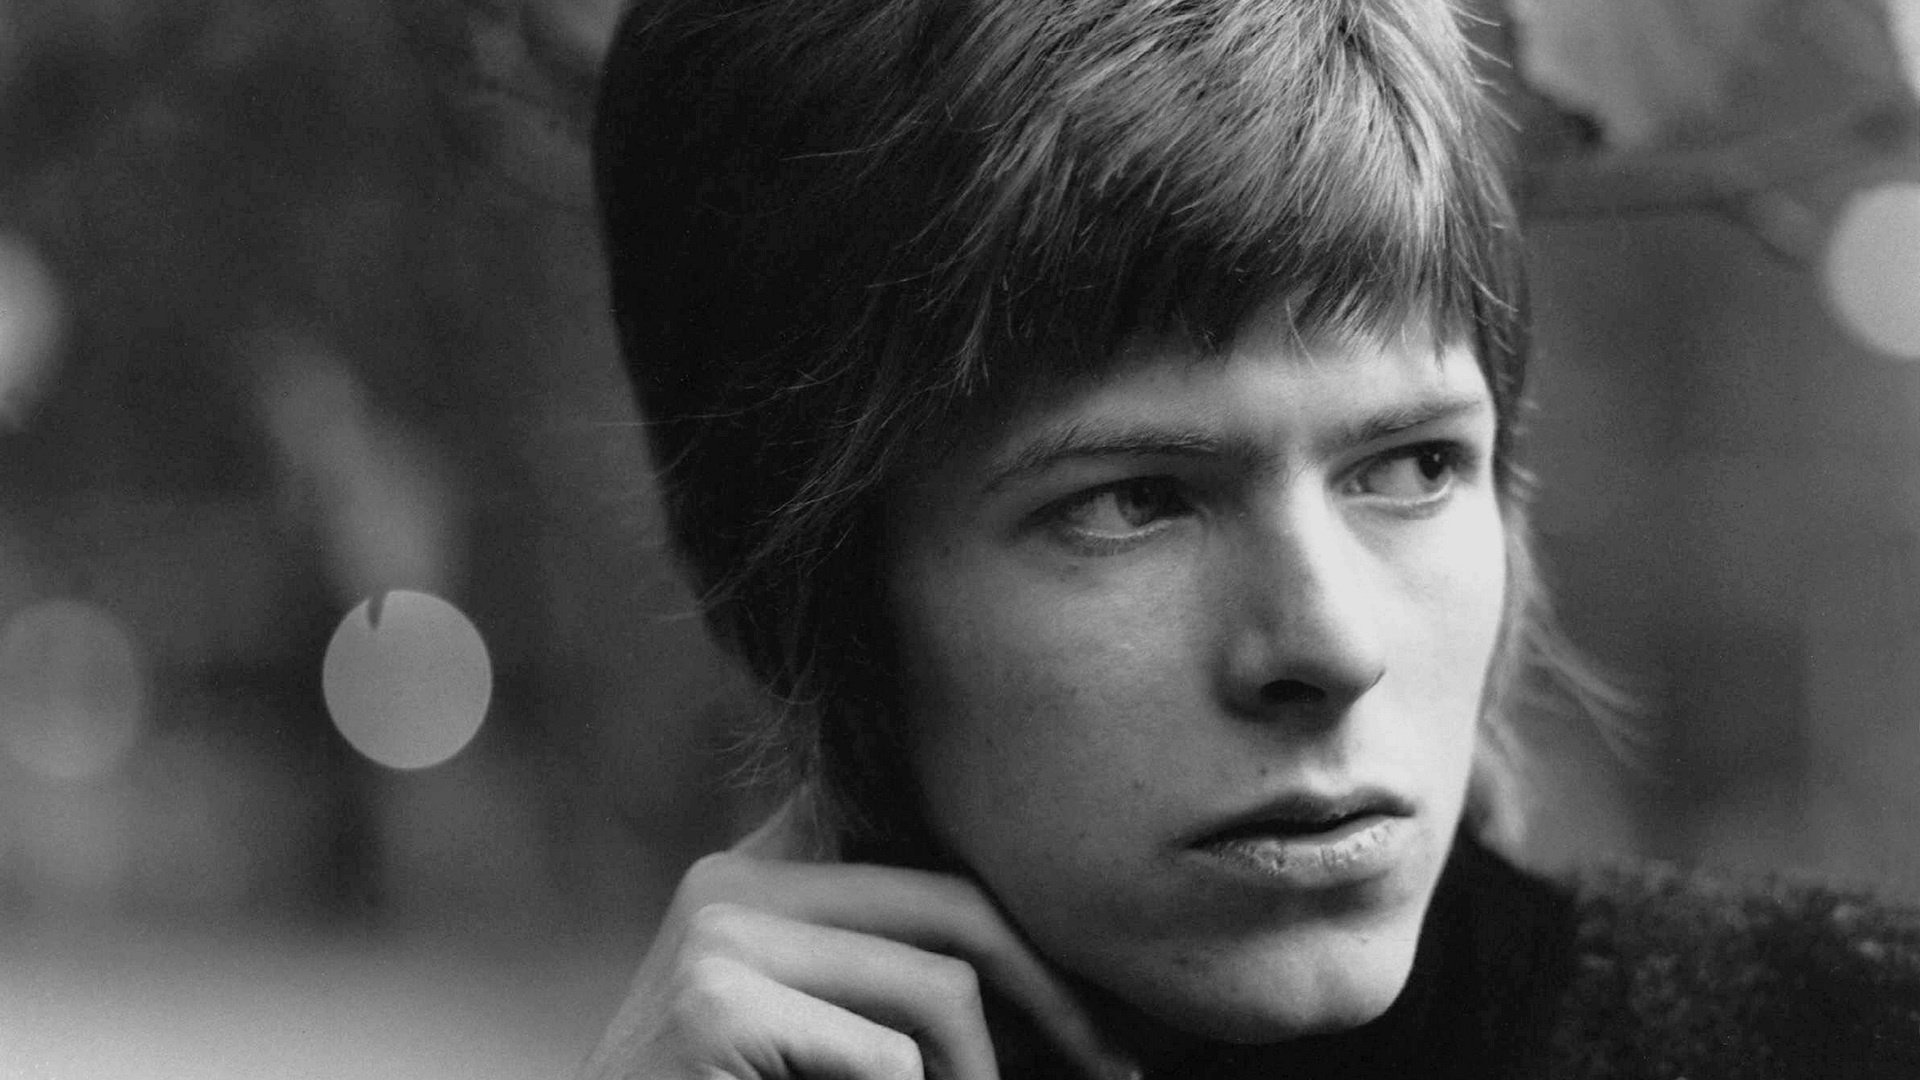 David Bowie: "Moonage Daydream" was originally recorded in February 1971. 1920x1080 Full HD Background.